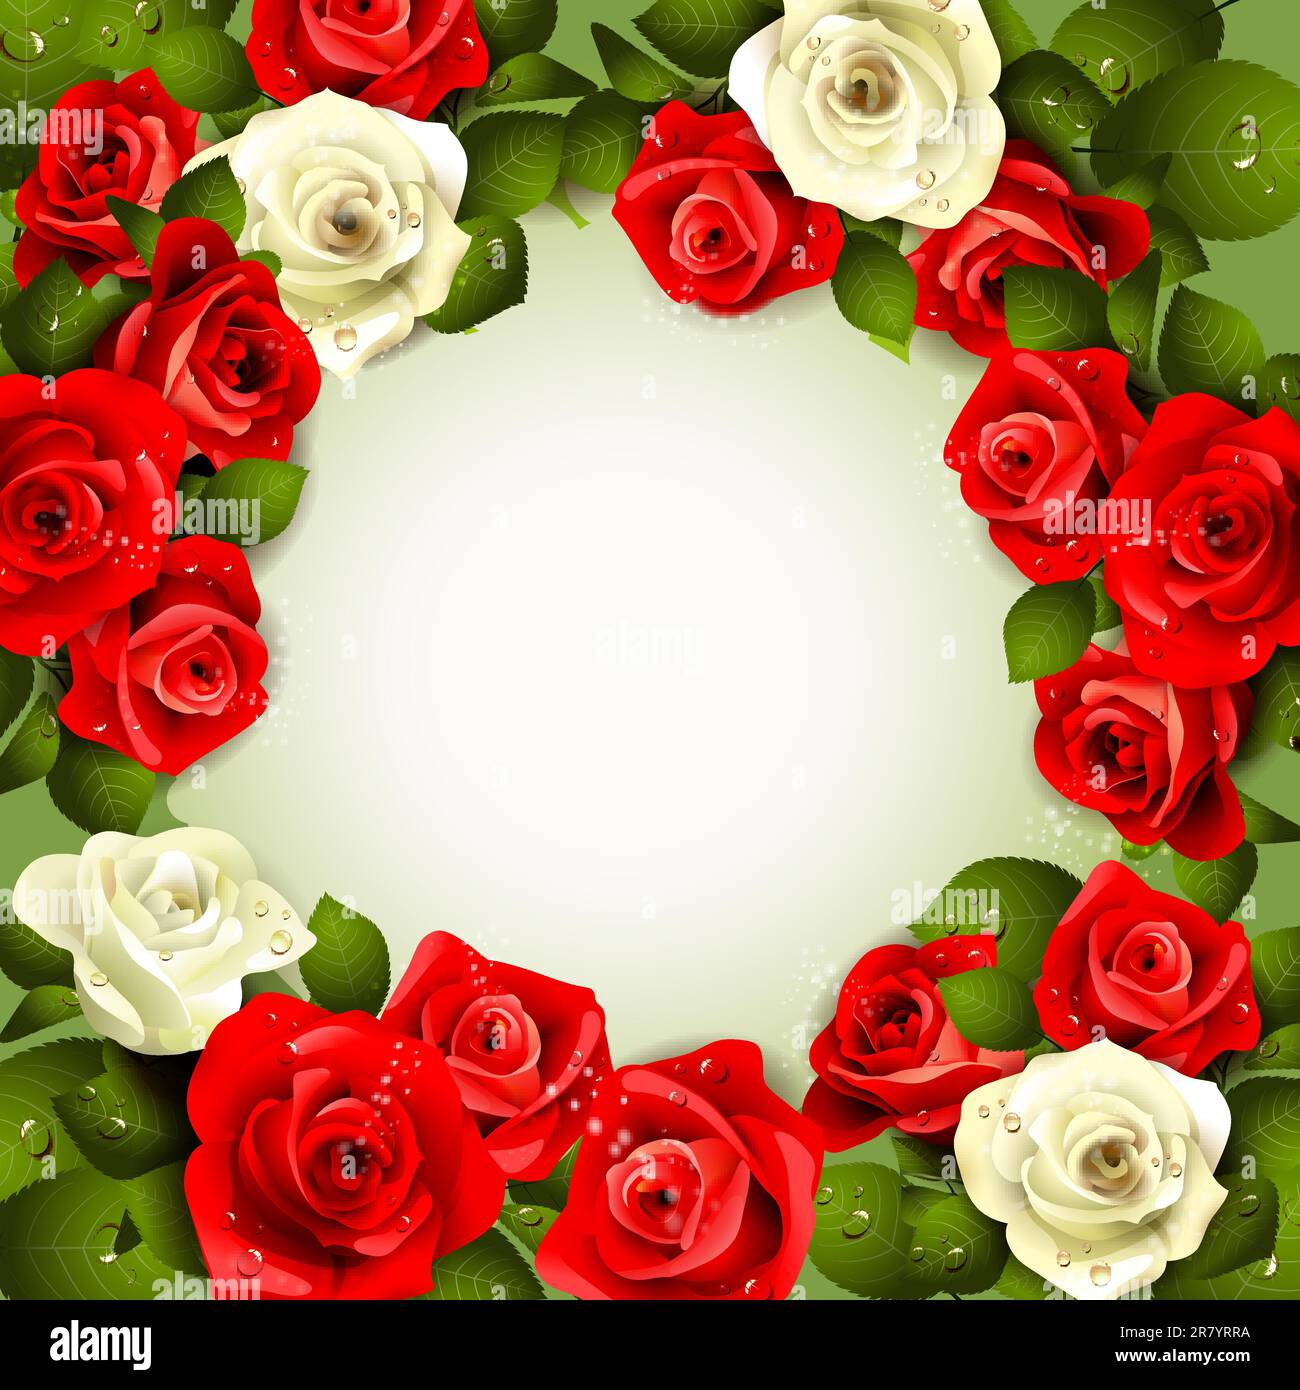 Background with white and red roses Stock Vector